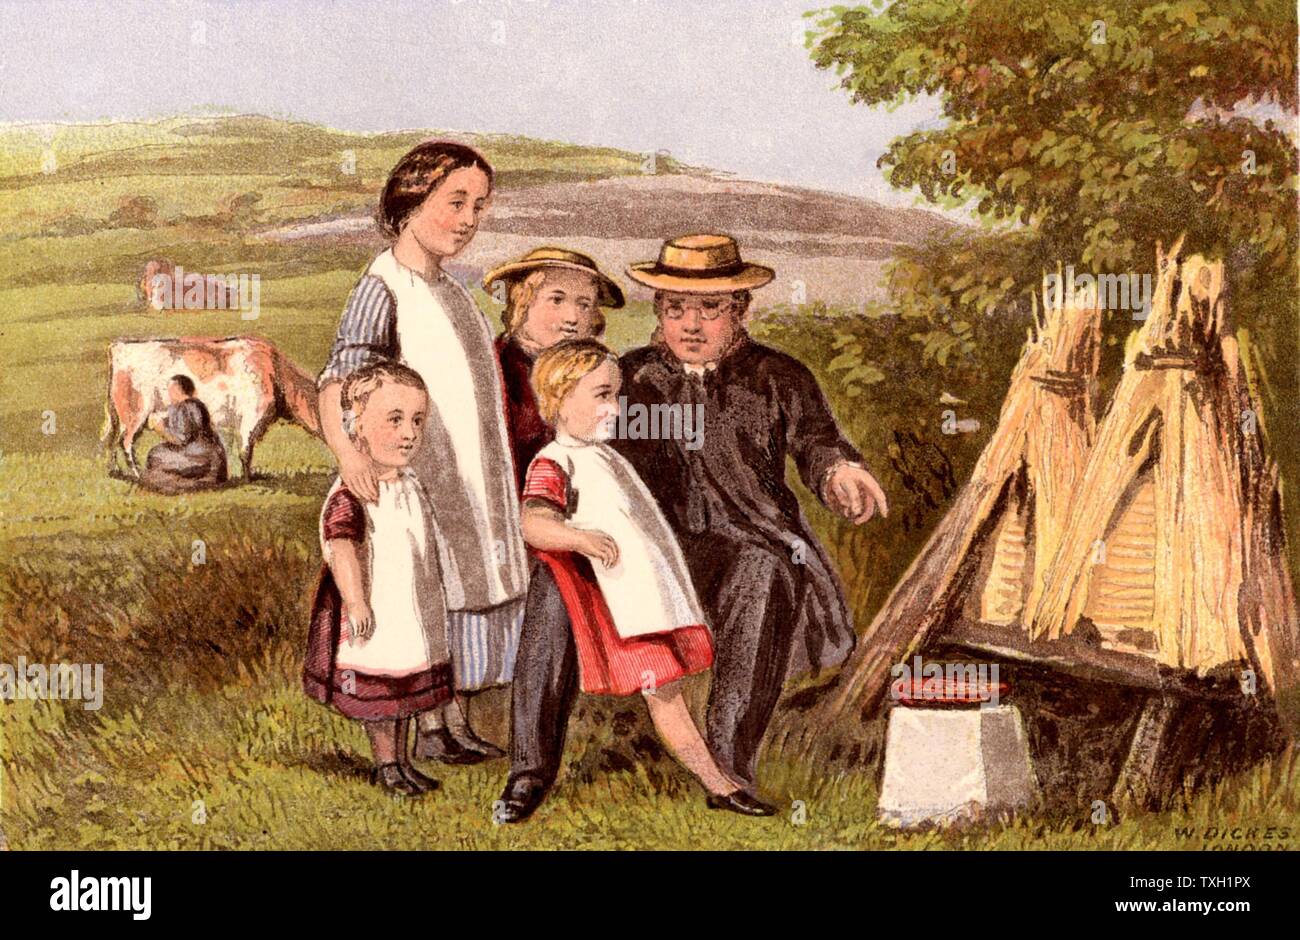 Children being shown straw beehives or skeps. In the 19th century Bees were a popular example of industriousness. Chromolithograph from 'Household Pictures for Home and School'  c1875. Stock Photo